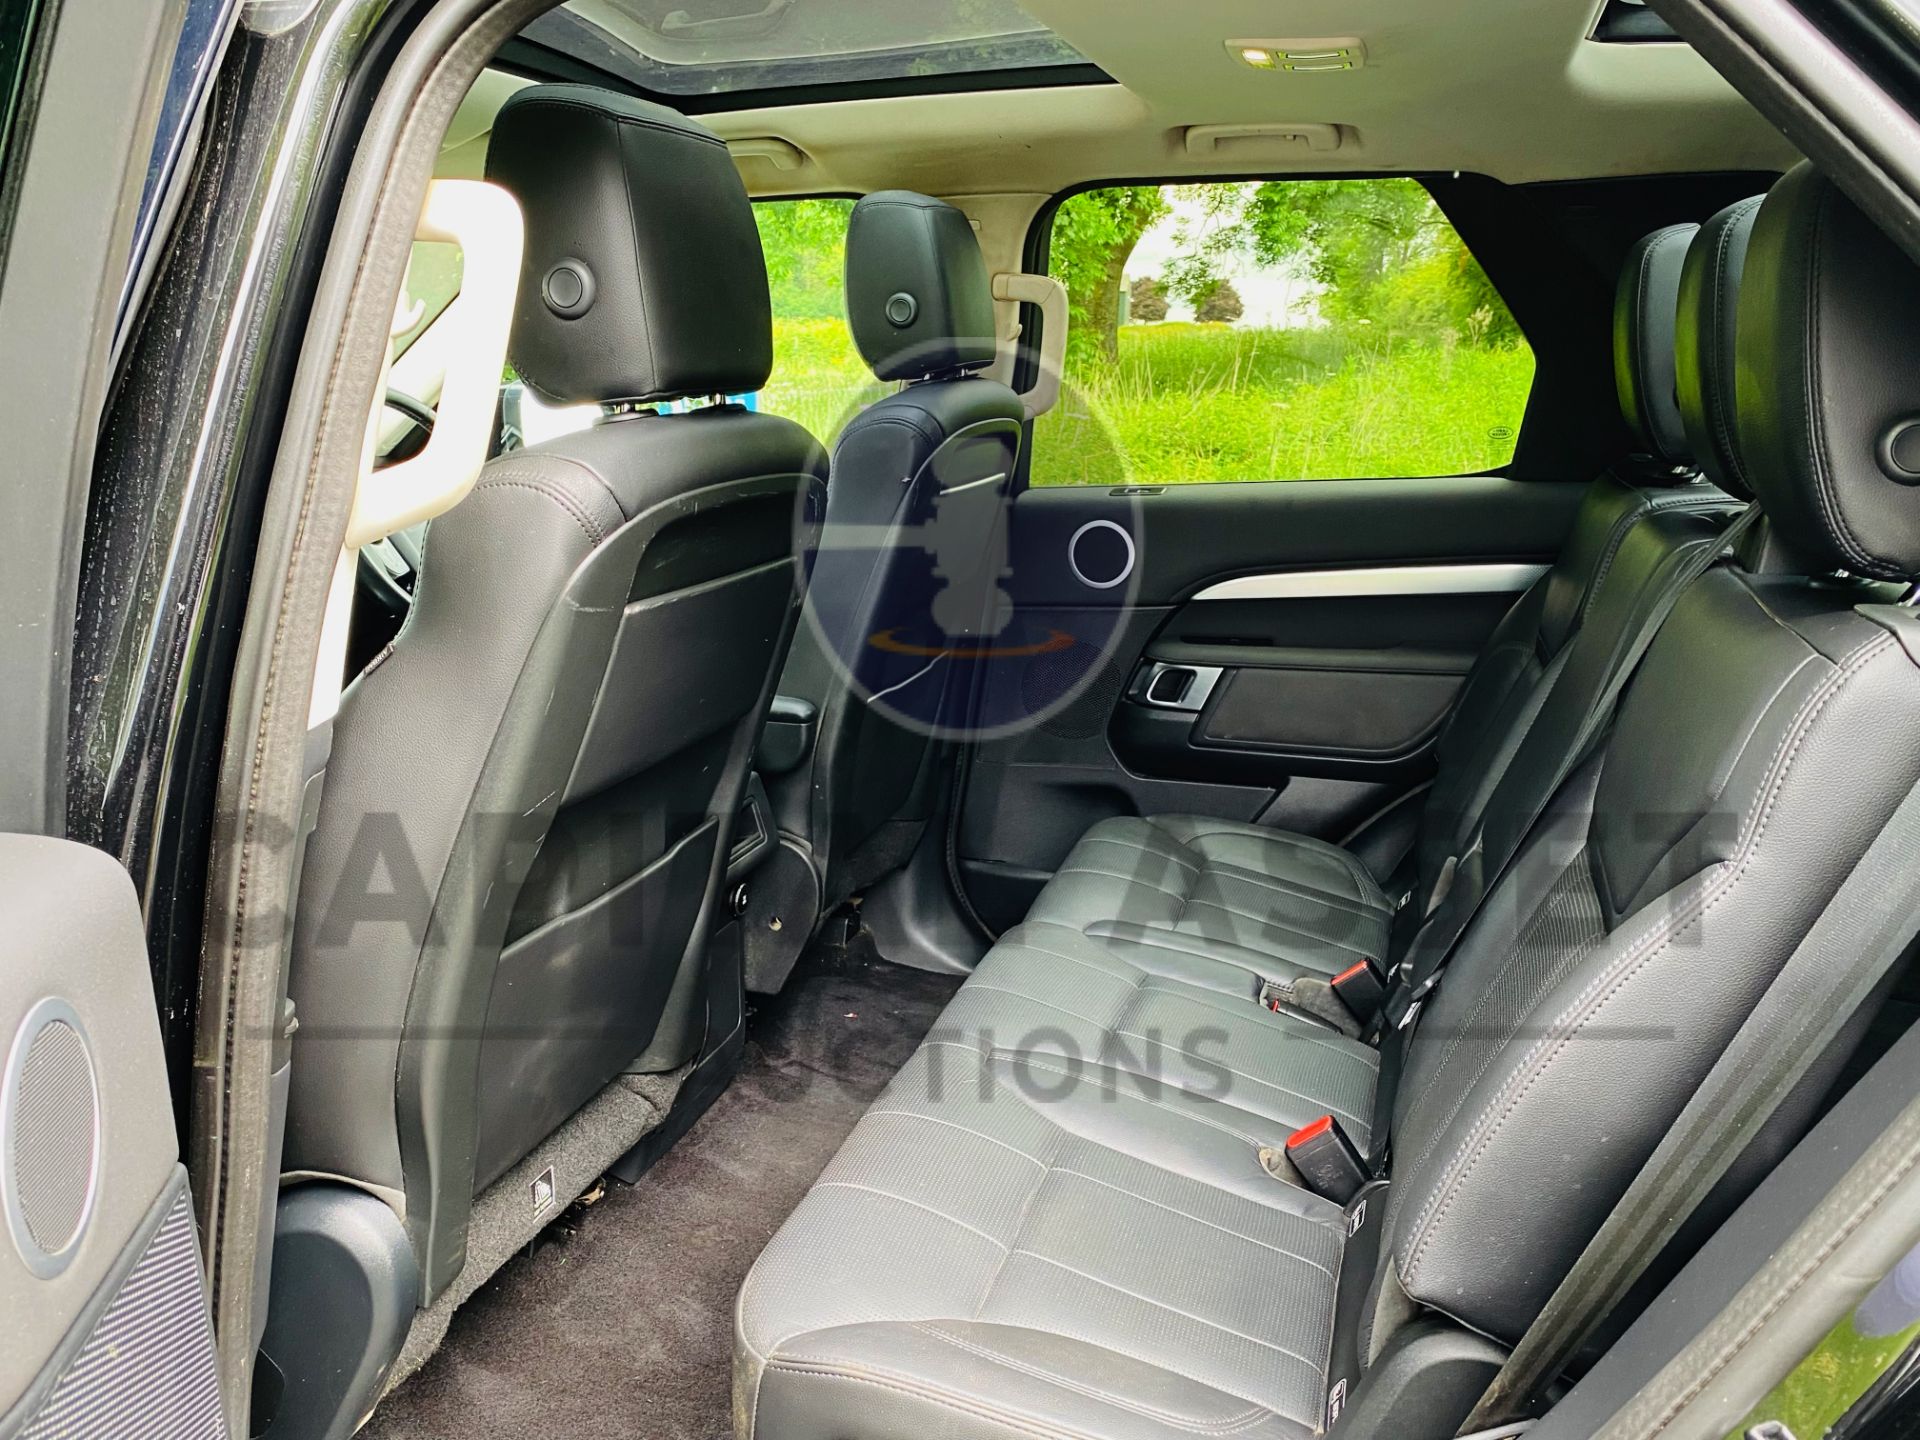 LAND ROVER DISCOVERY 5 *LANDMARK* 7 SEATER SUV (2020 - EURO 6) 3.0 SD6 - 8 SPEED AUTO *FULLY LOADED* - Image 27 of 63